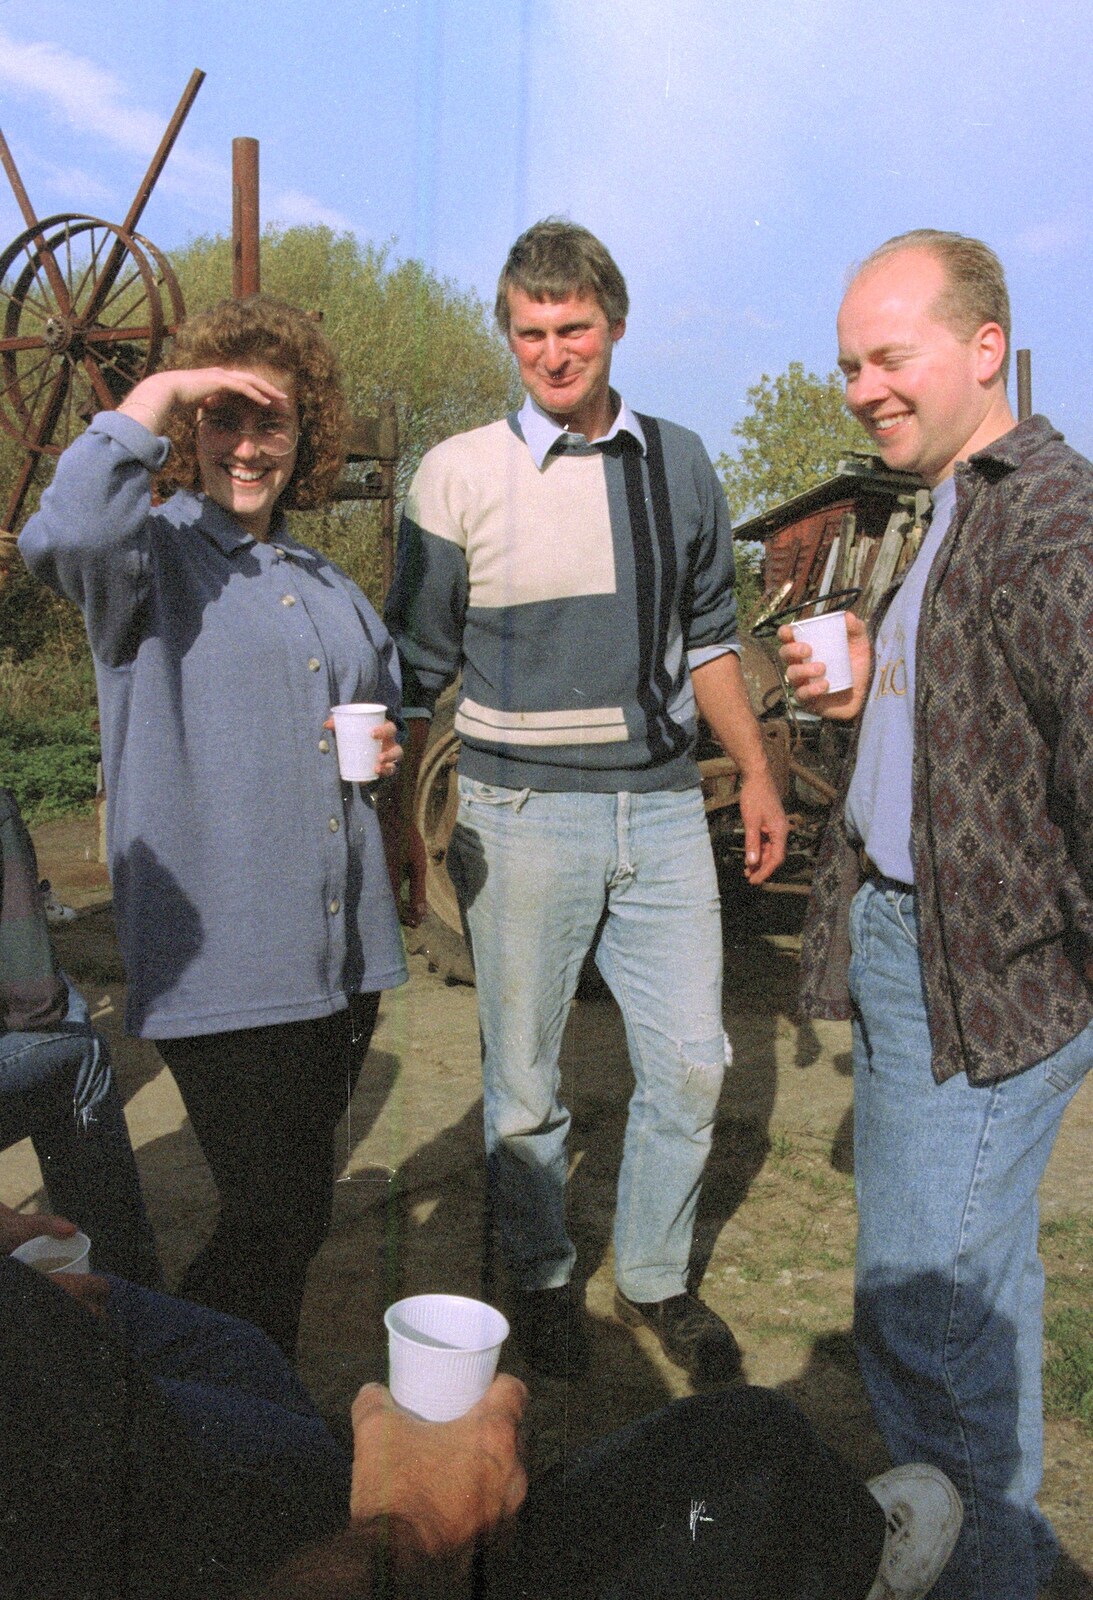 Time for a break with last year's cider from Cider Making With Geoff and Brenda, Stuston, Suffolk - 10th September 1998